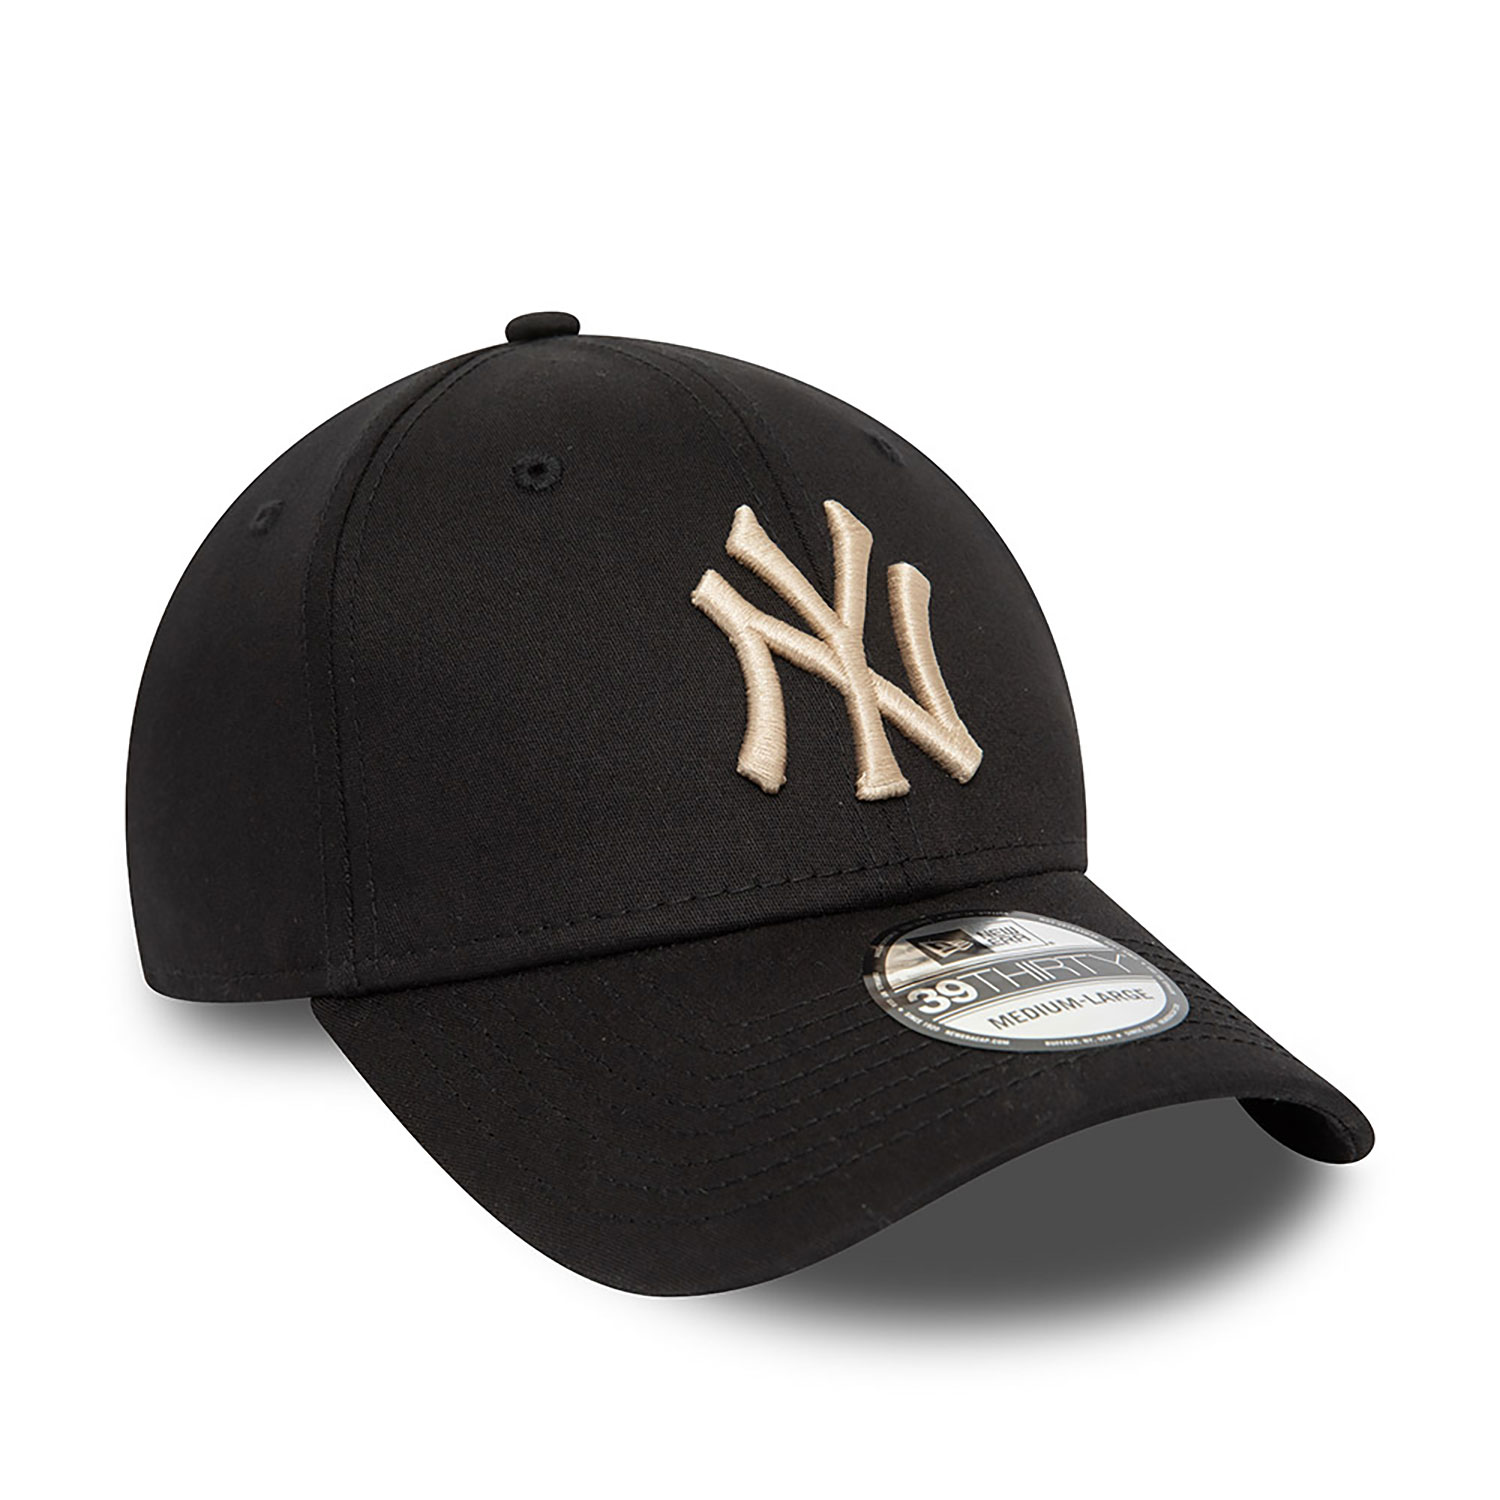 New York Yankees League Essential Black 39THIRTY Stretch Fit Cap